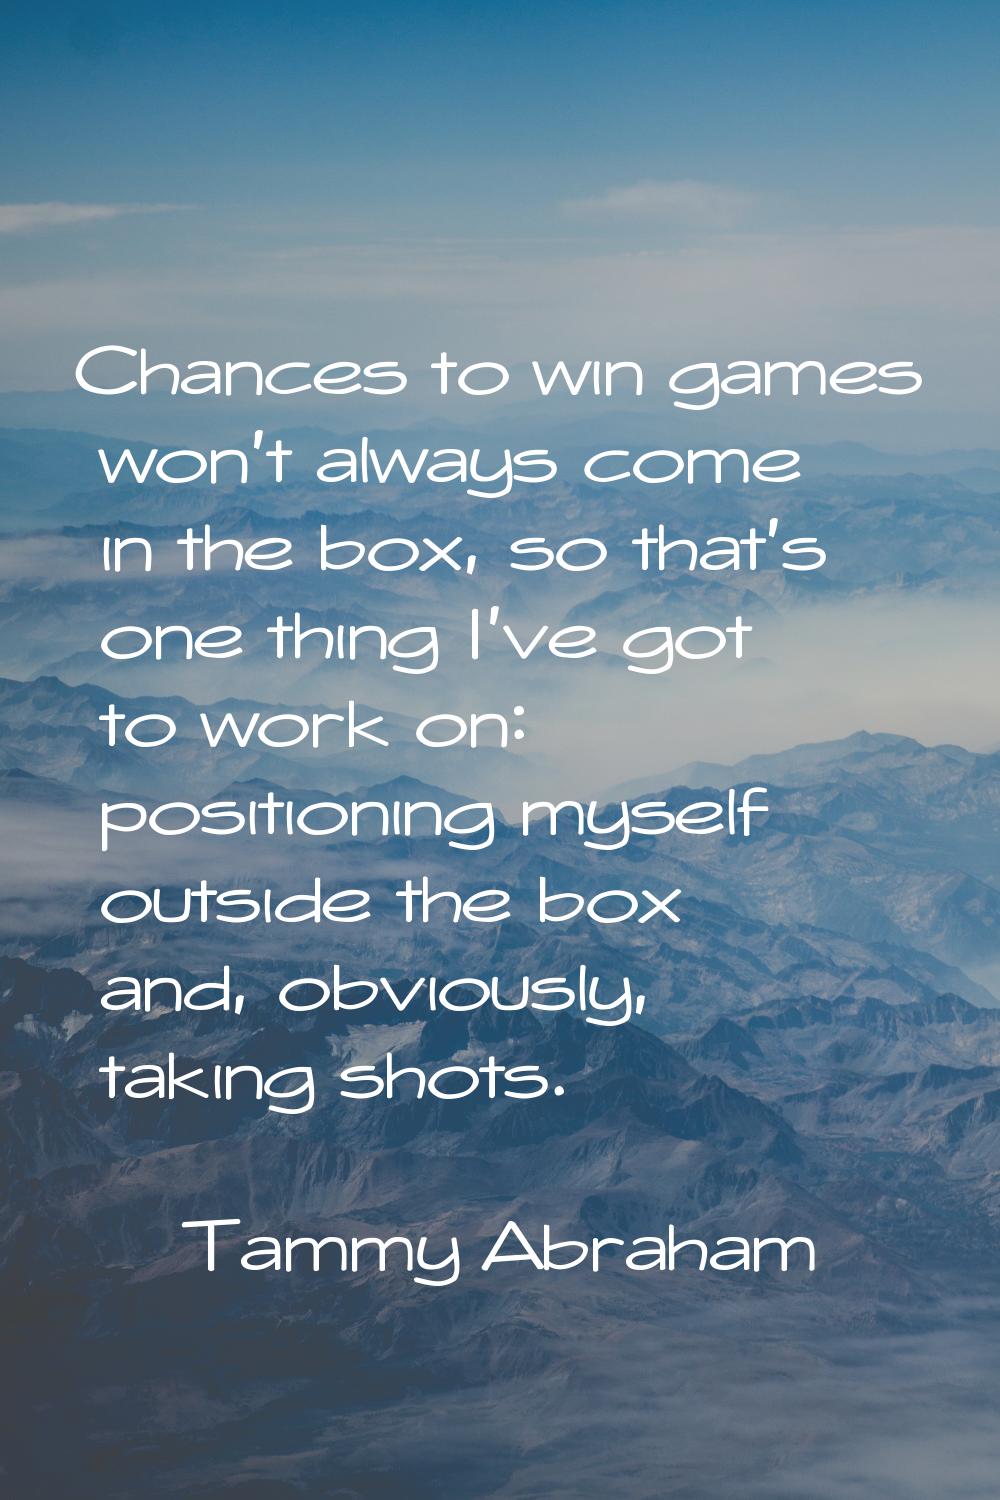 Chances to win games won't always come in the box, so that's one thing I've got to work on: positio